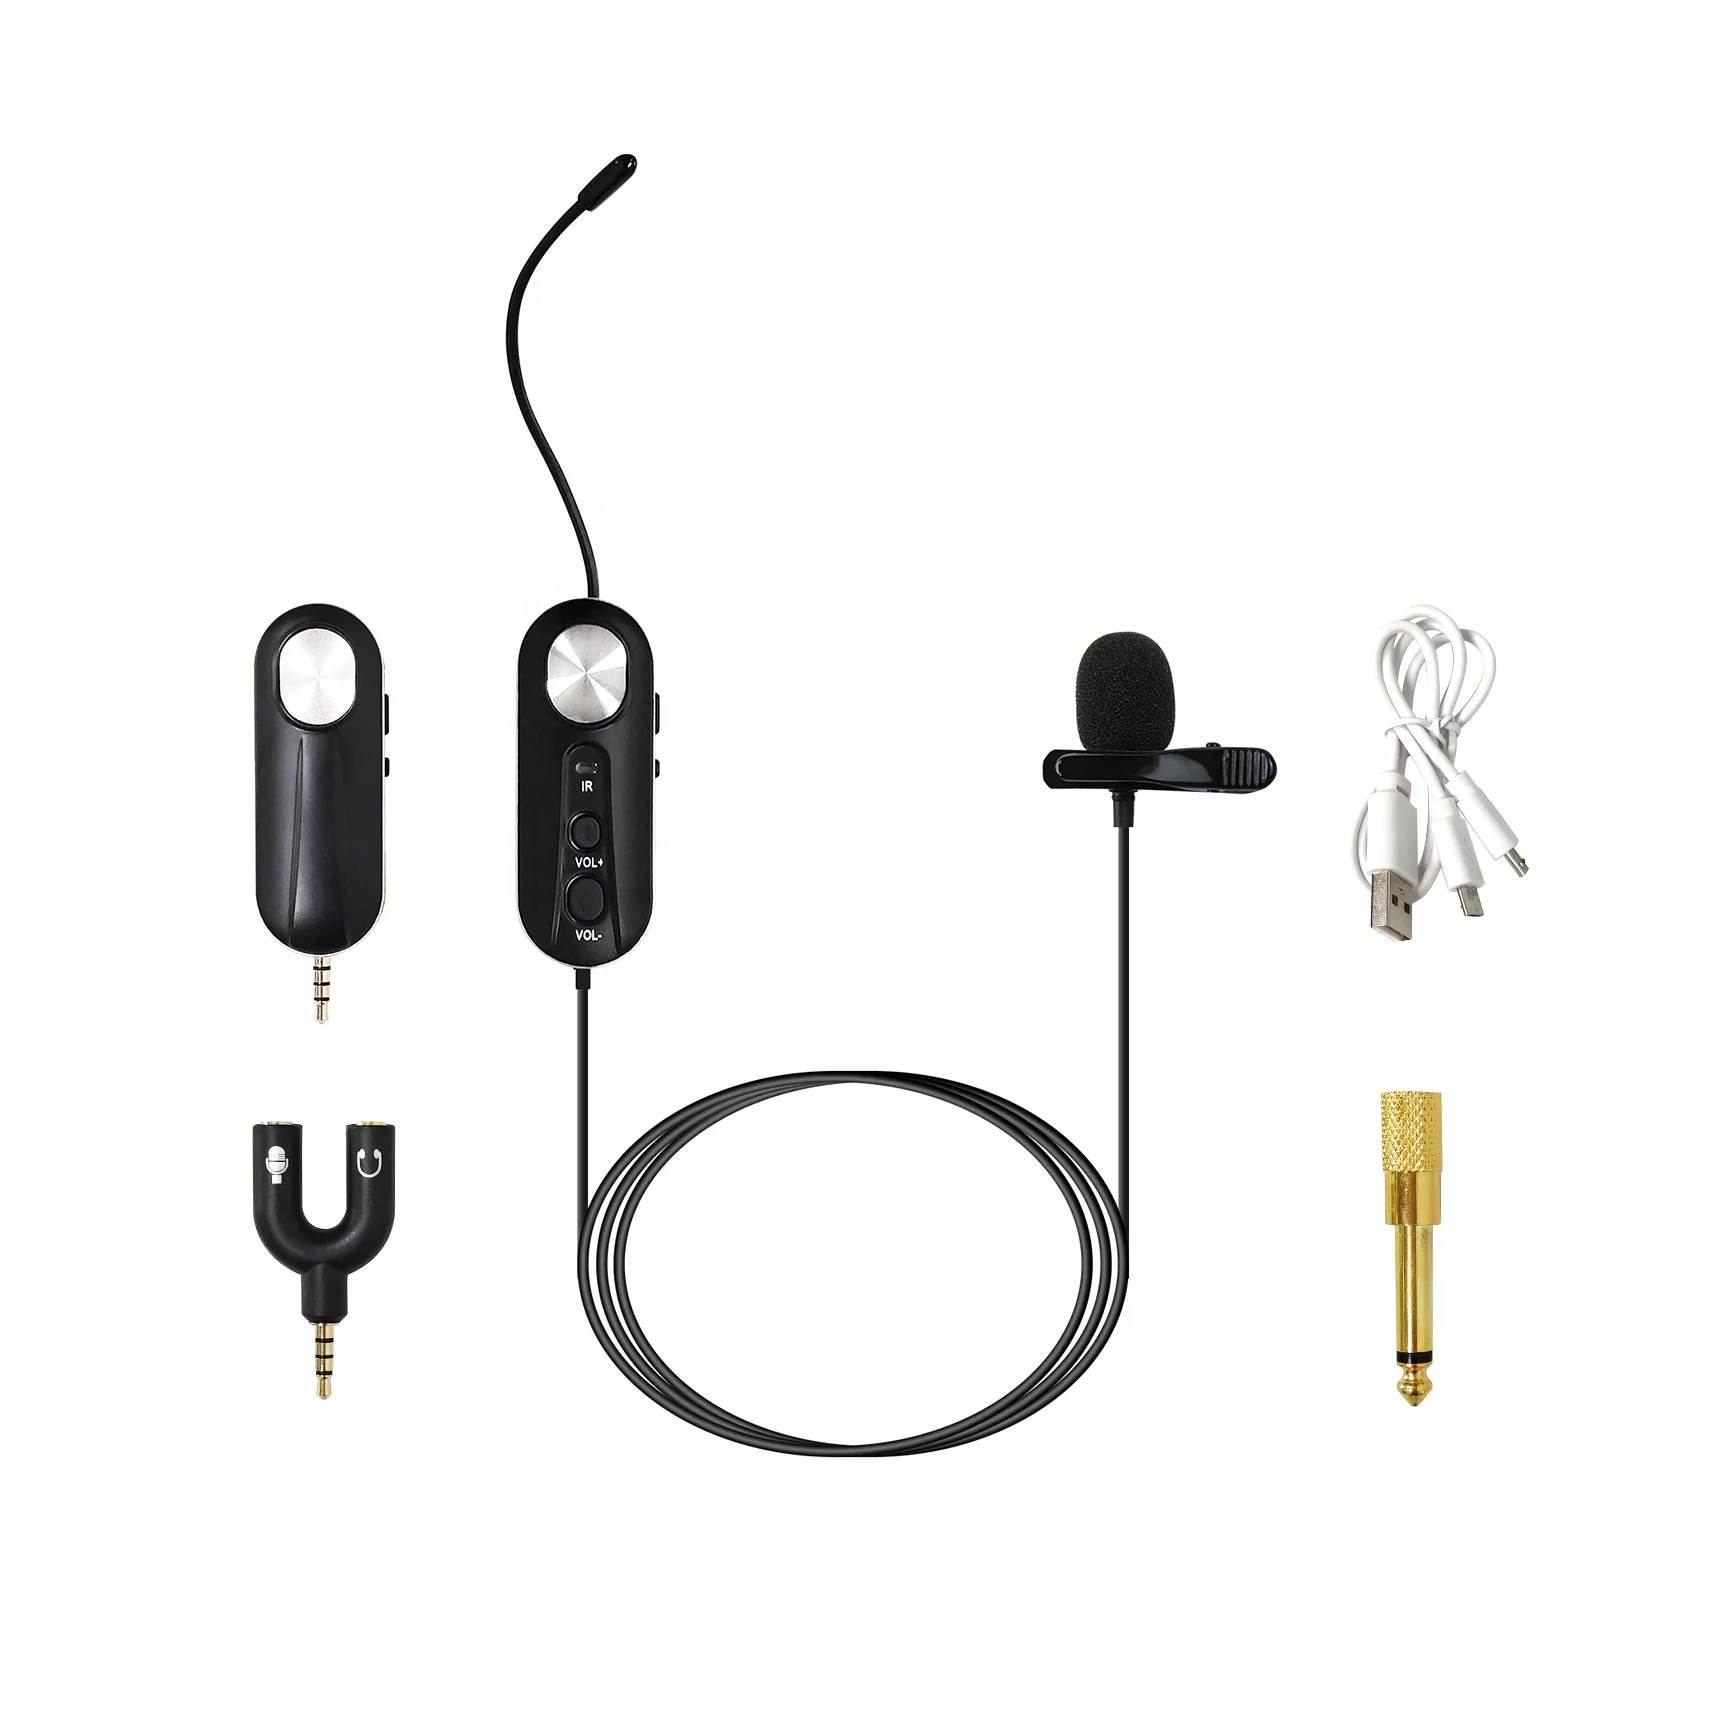 

UHF headset Wireless Lavalier Lapel Clip-on Mic for iPhone Android Microphone Phone UHF Voice Video Recording Microphone